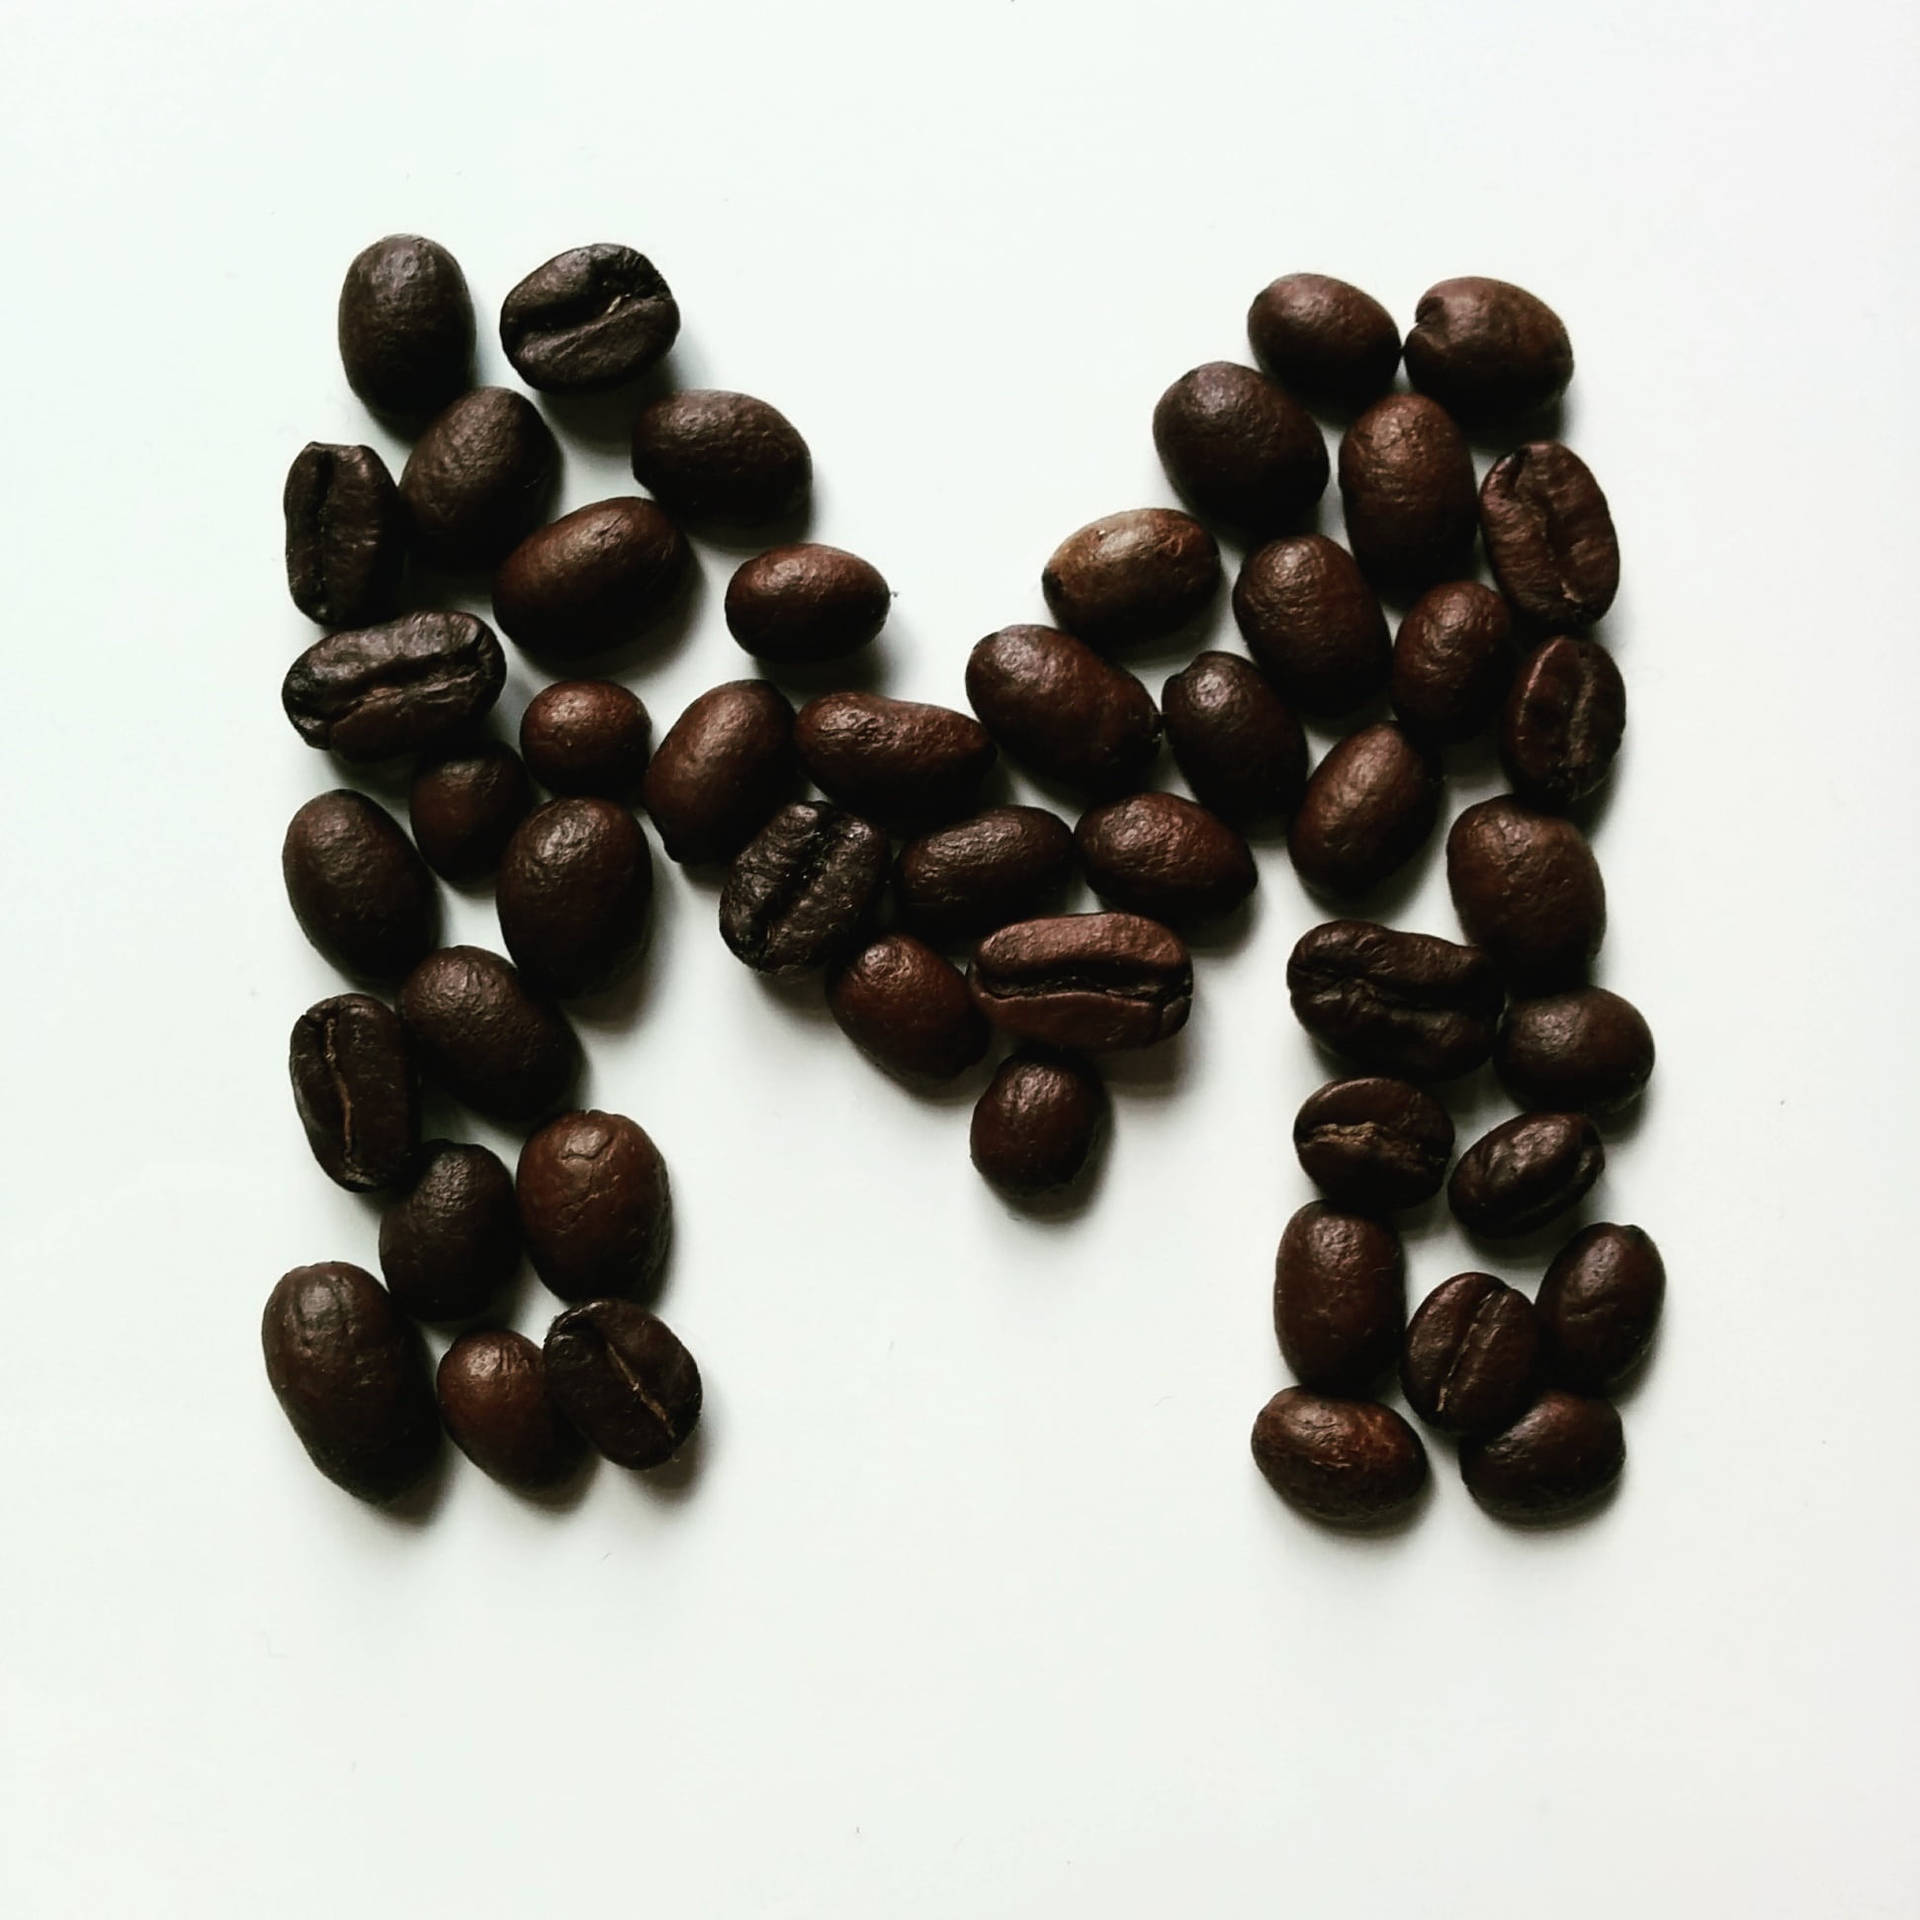 Letter M Formed With Coffee Beans